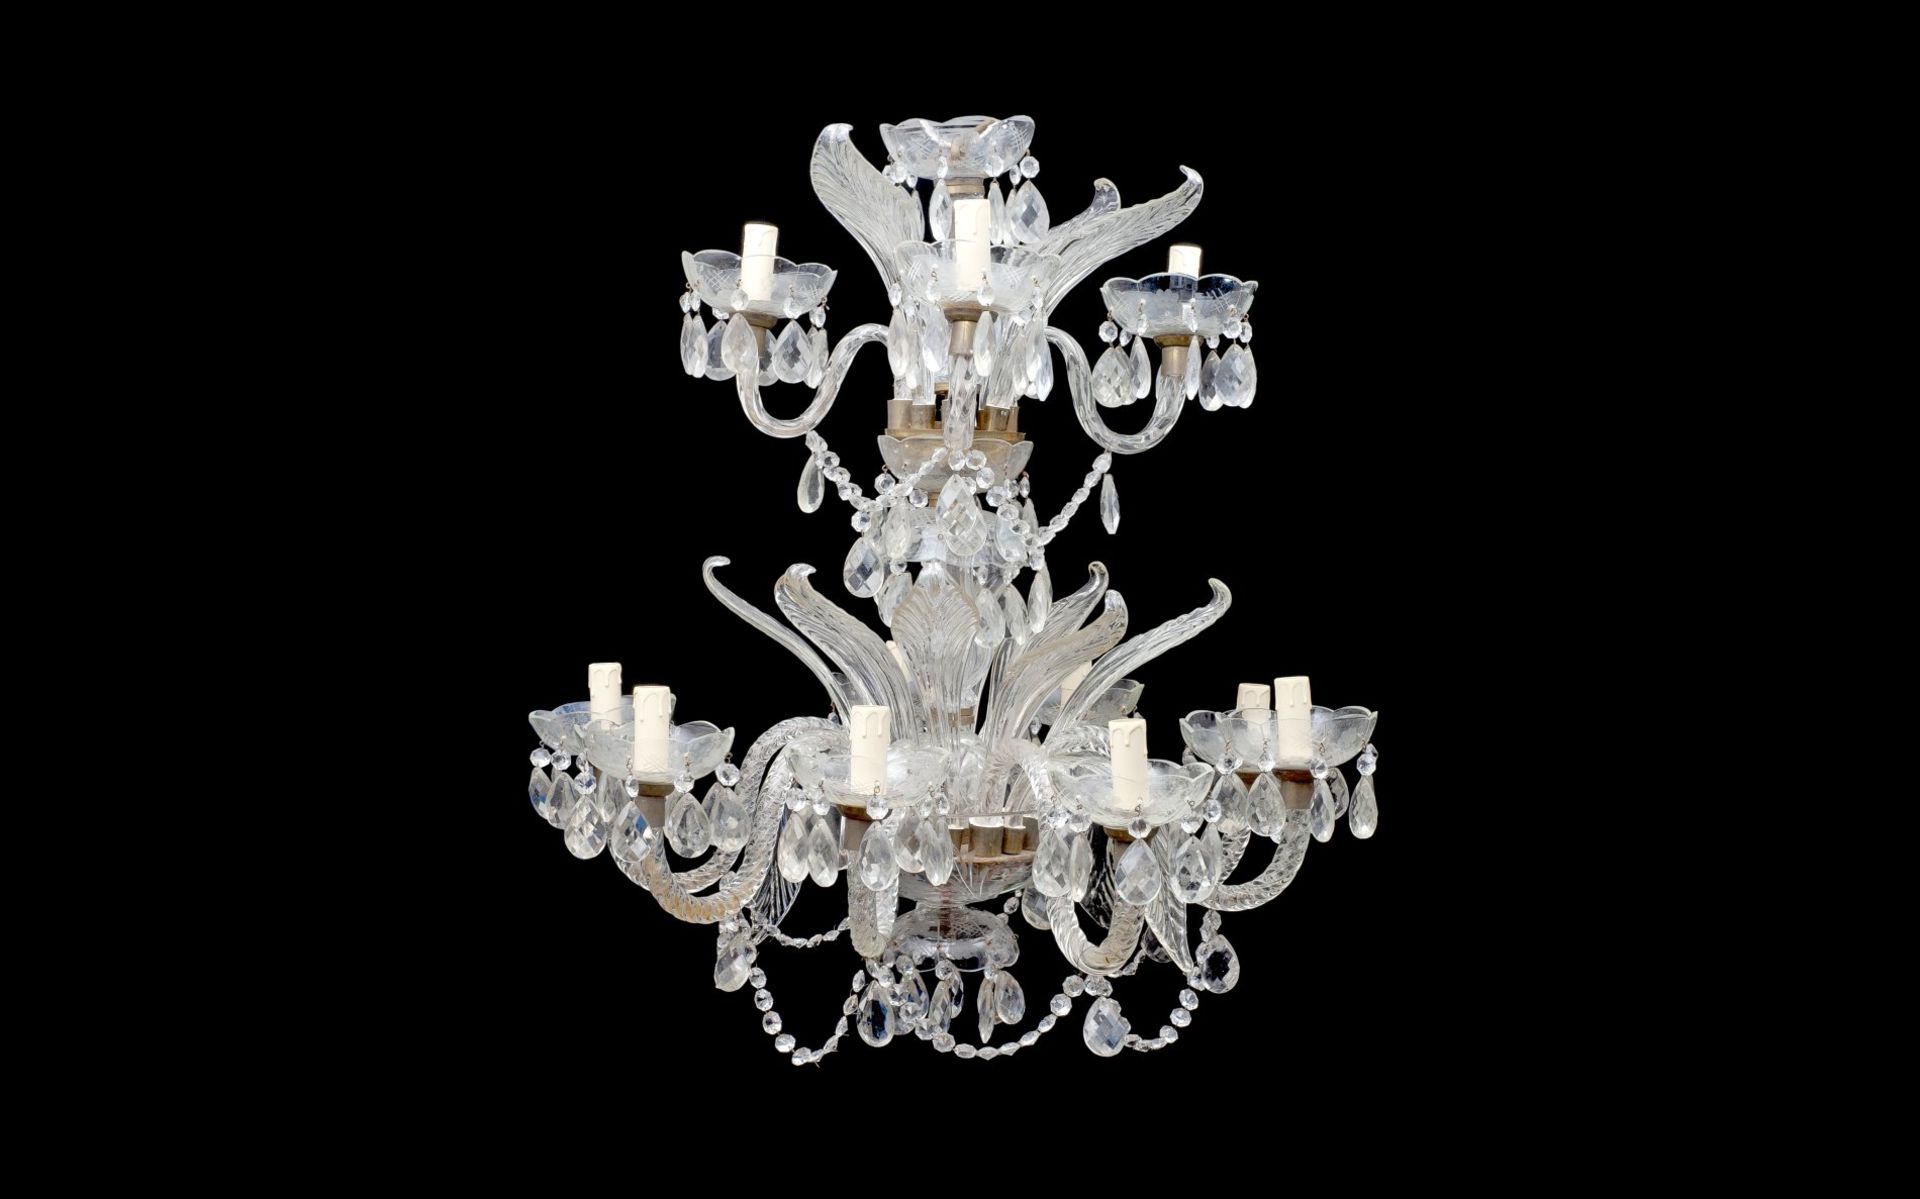 AN 18TH CENTURY STYLE CUT, MOULDED AND ETCHED GLASS TWO TIER CHANDELIER